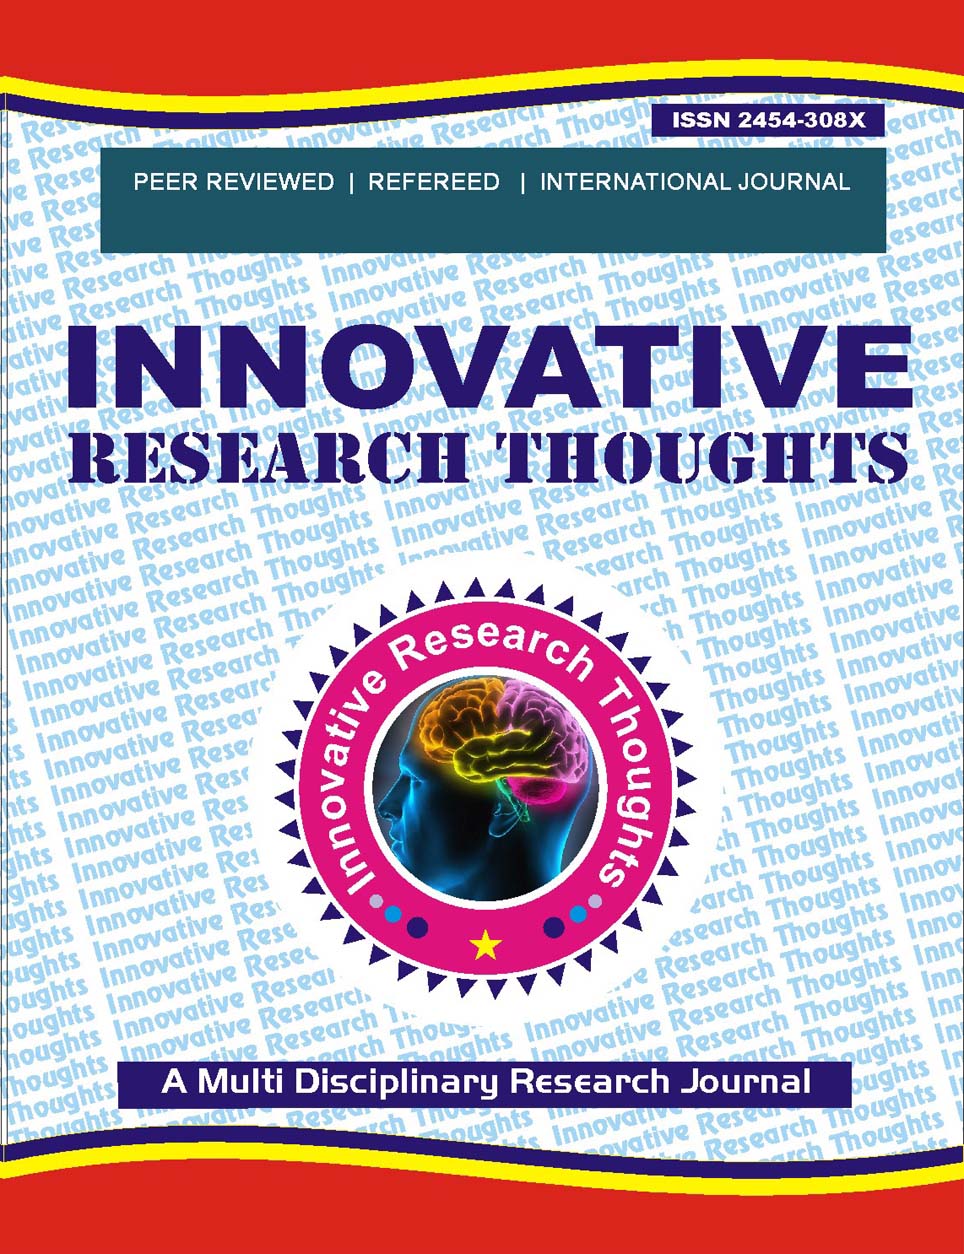  Peer Reviwed and Refereed International Research Journal